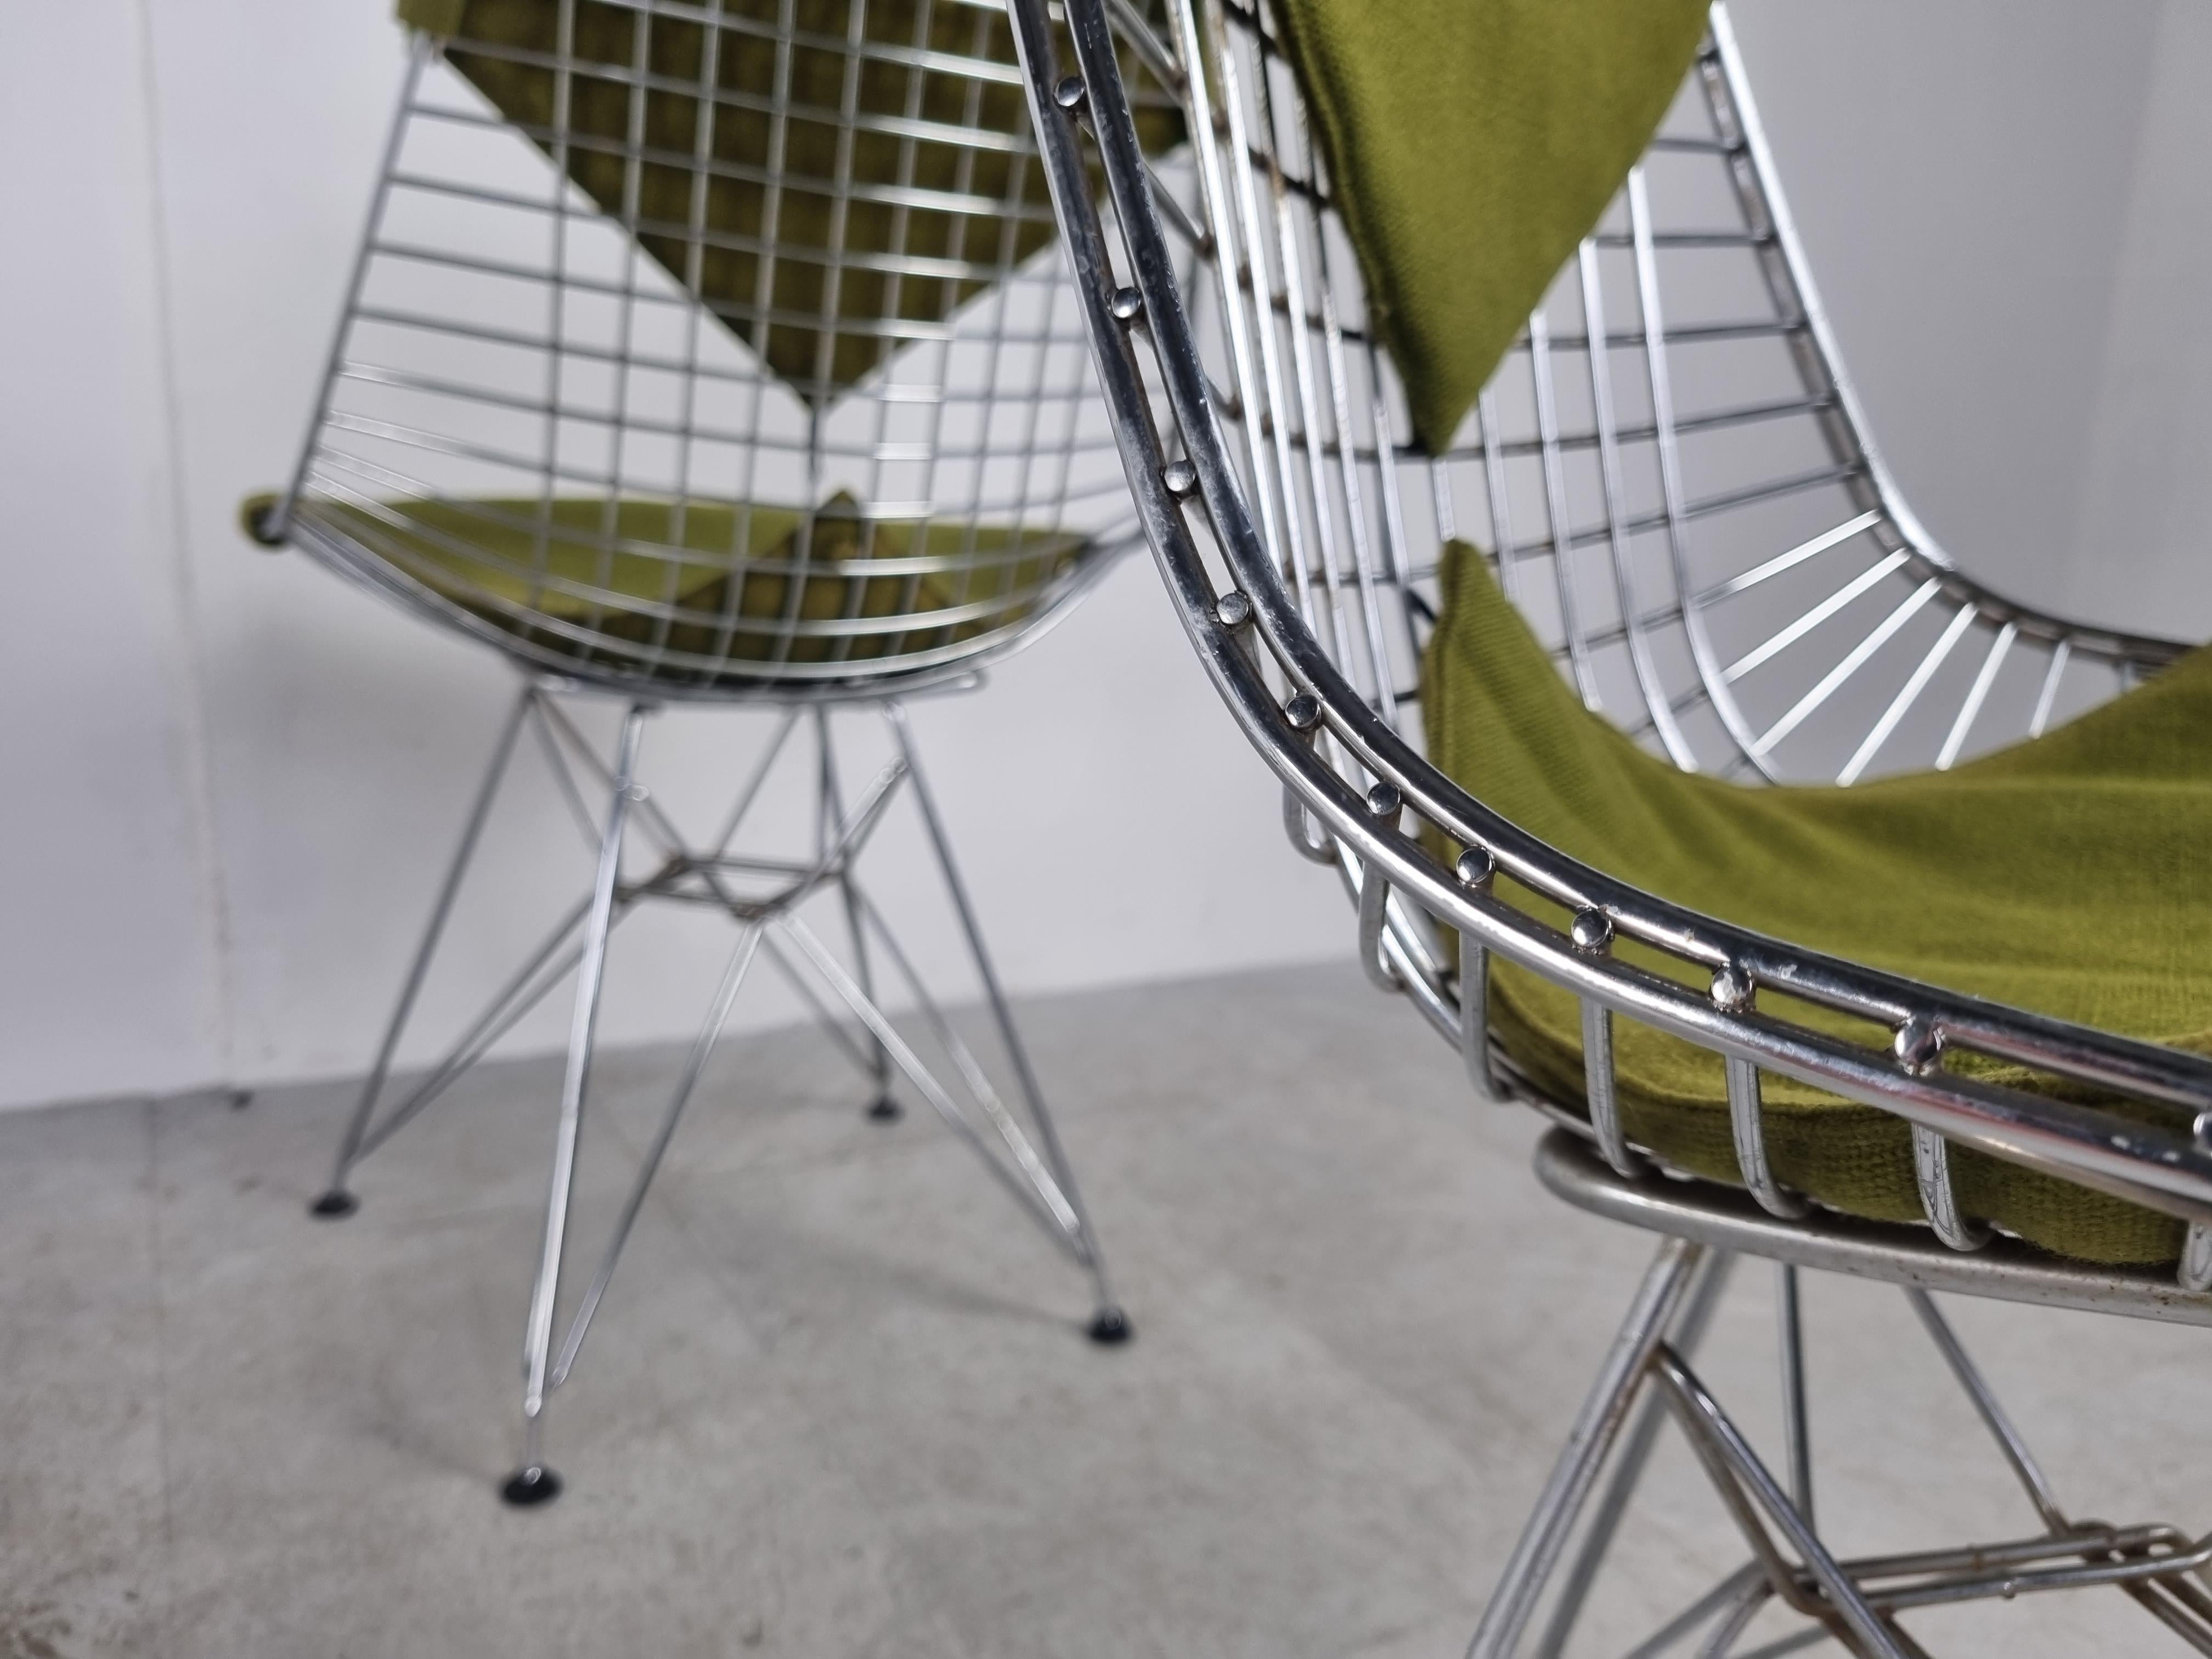 Eames Chrome Wire Bikini Chairs for Herman Miller, 1960s For Sale 5